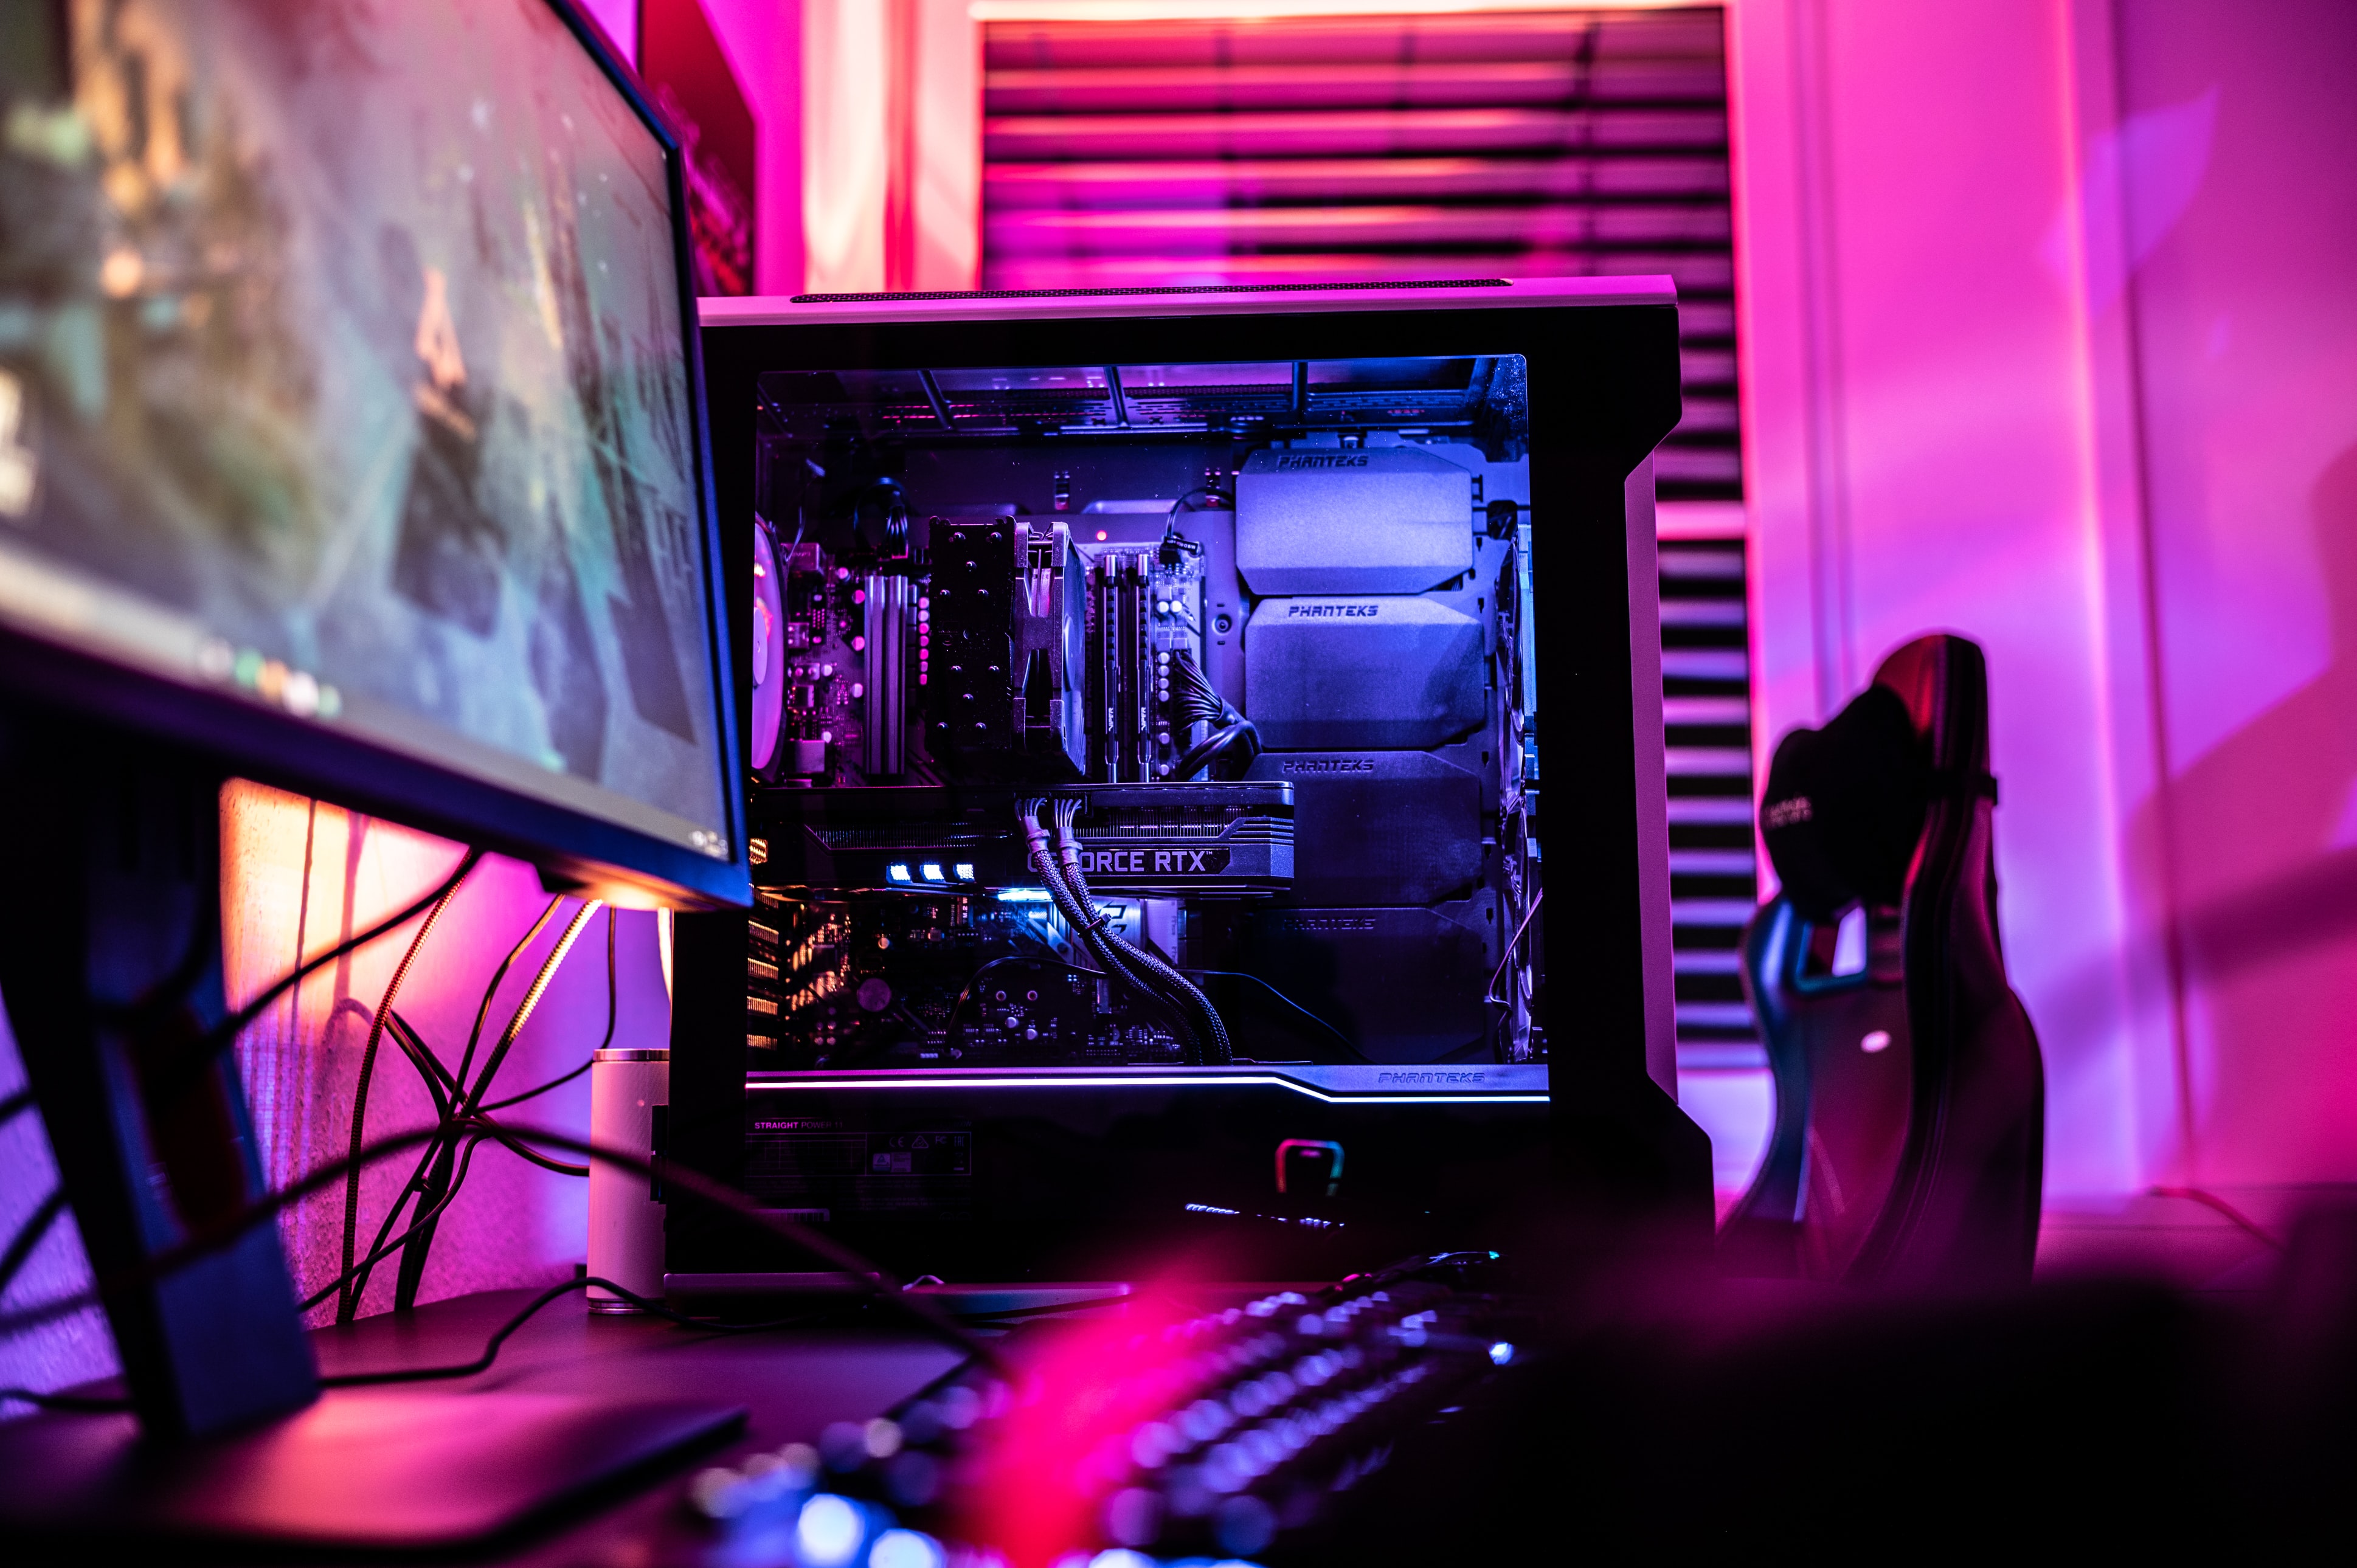 How To Build An Energy-Efficient Gaming PC That Saves You Money